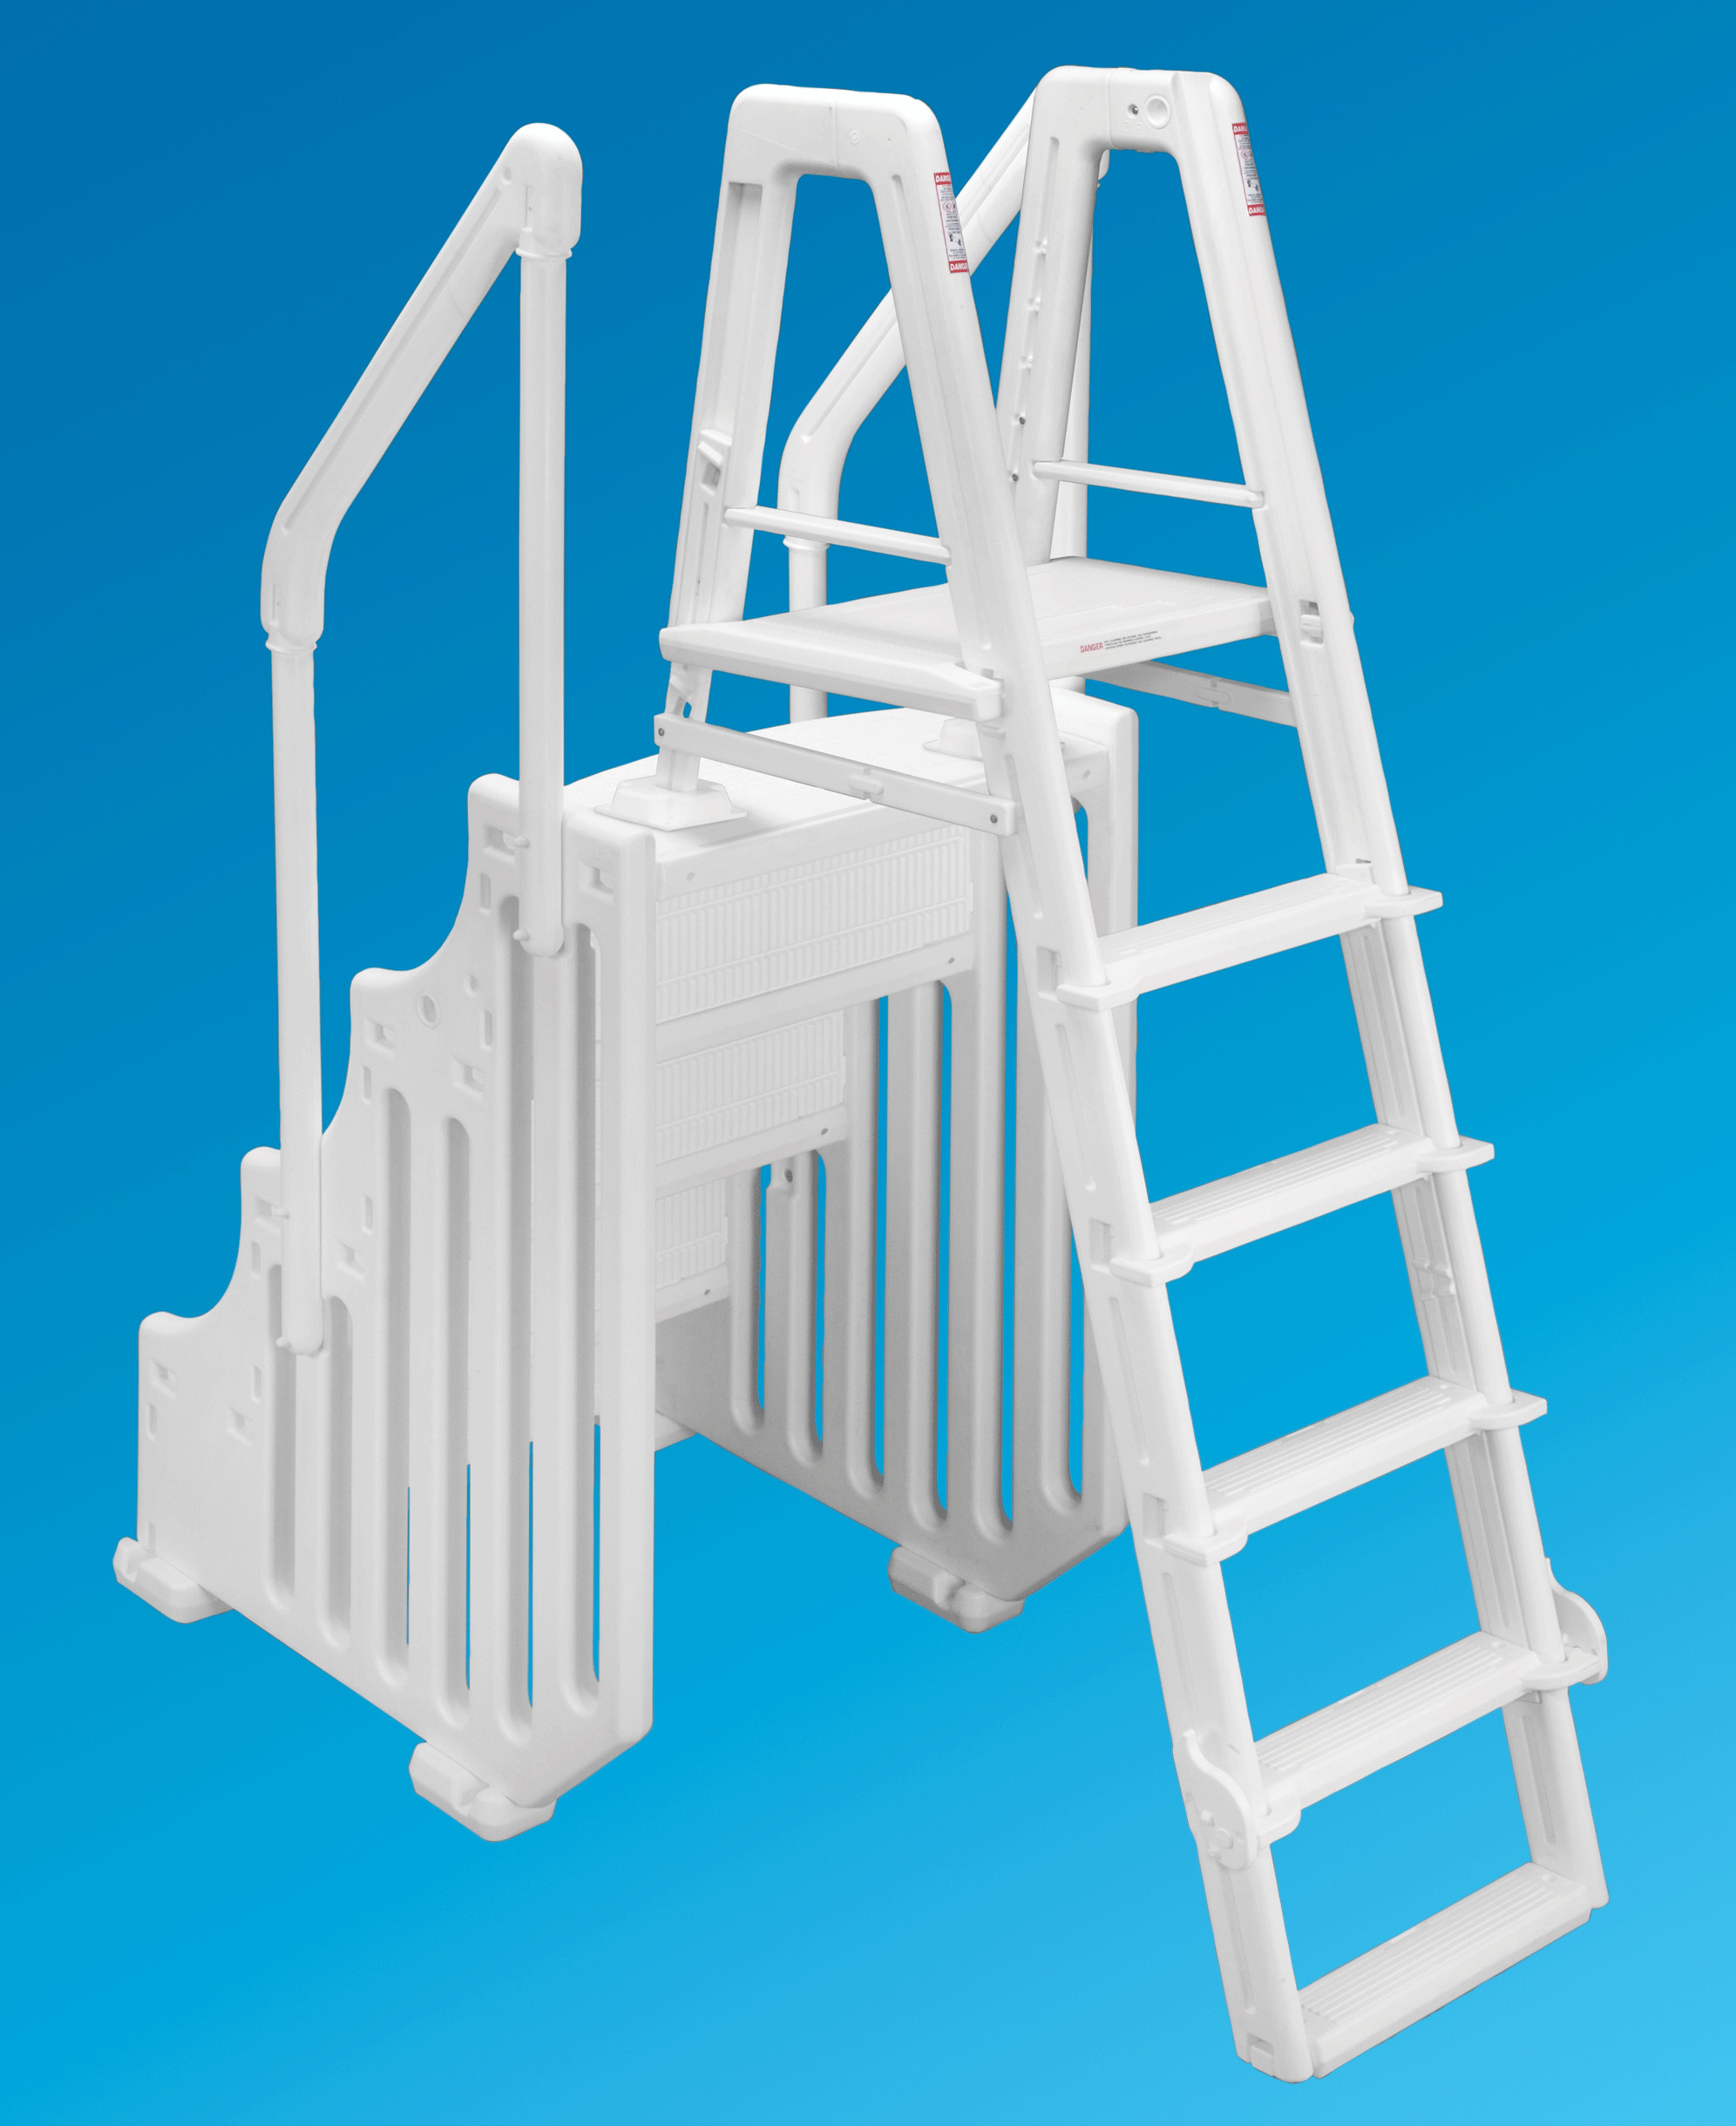 Above Ground Pool Ladder
 The Mighty Step and Safety Ladder Set 30" Wide